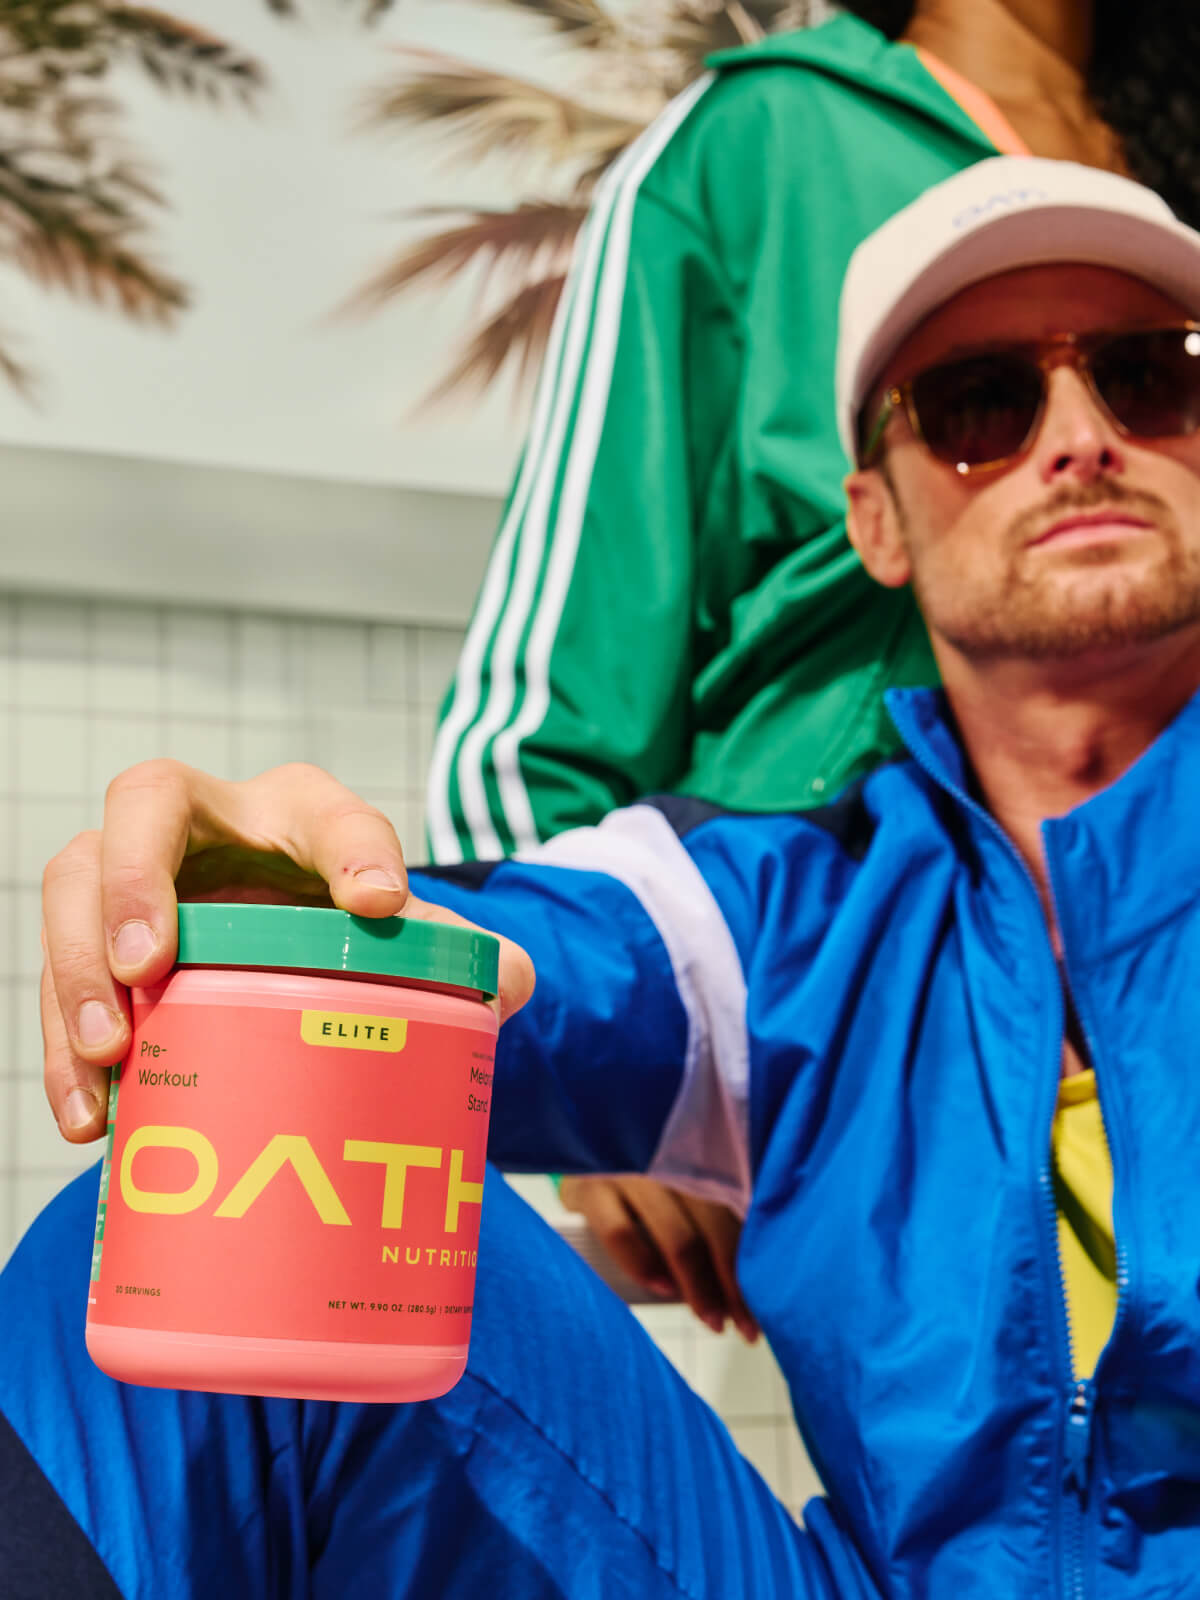 Cool guy holding an Oath Pre-Workout Melonade stand tub with a woman holding a Coco Razz Oath Elite Preworkout tub